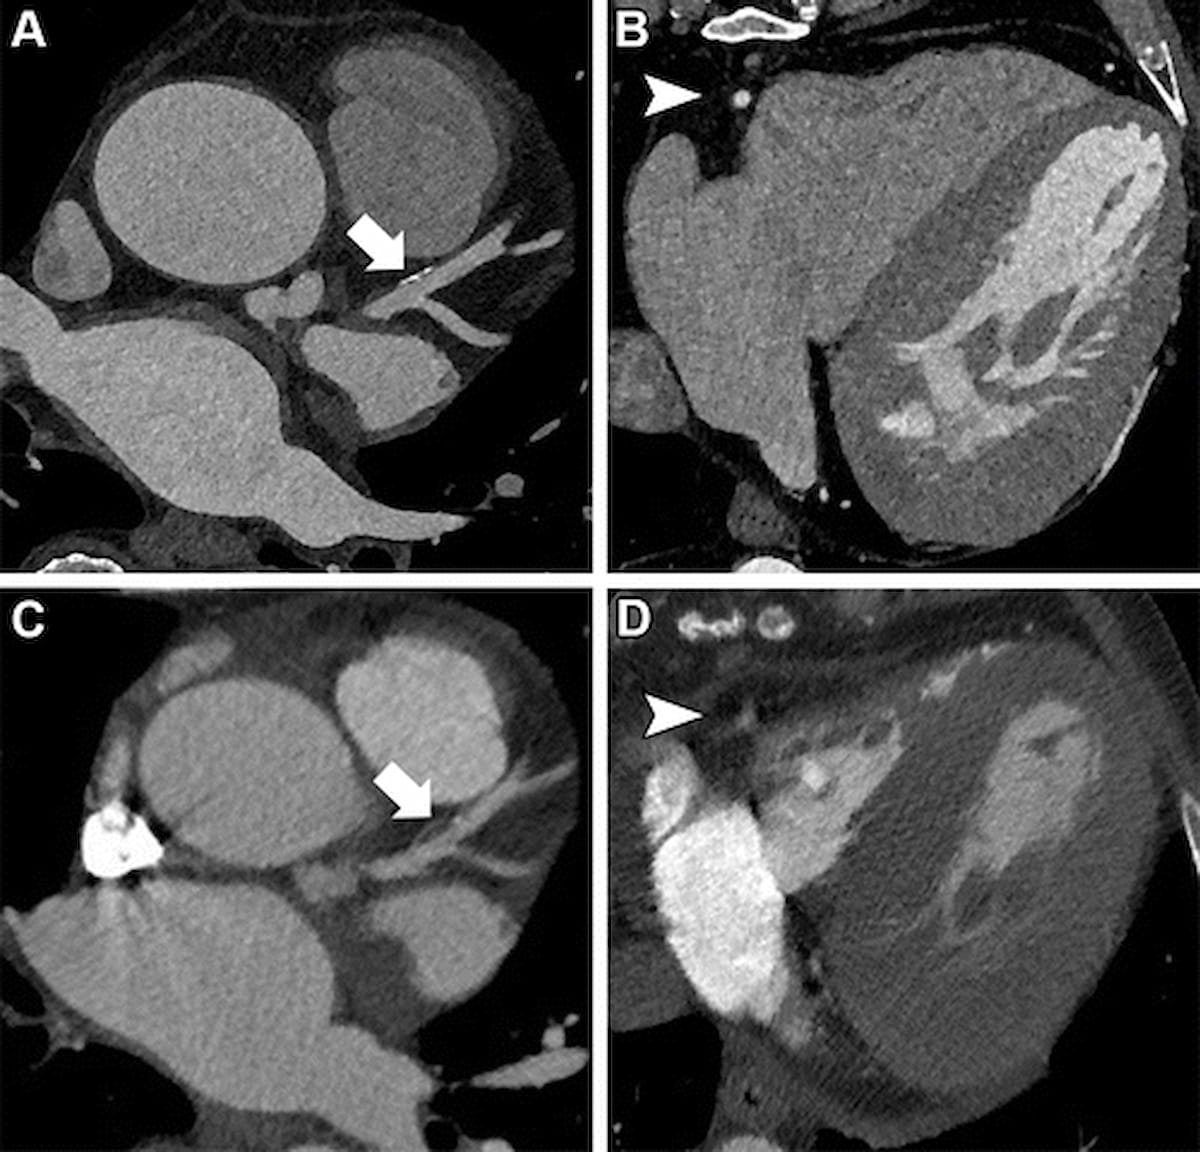 Study Examines Photon-Counting CT for Detection of CAD in Patients Having TAVR Procedures